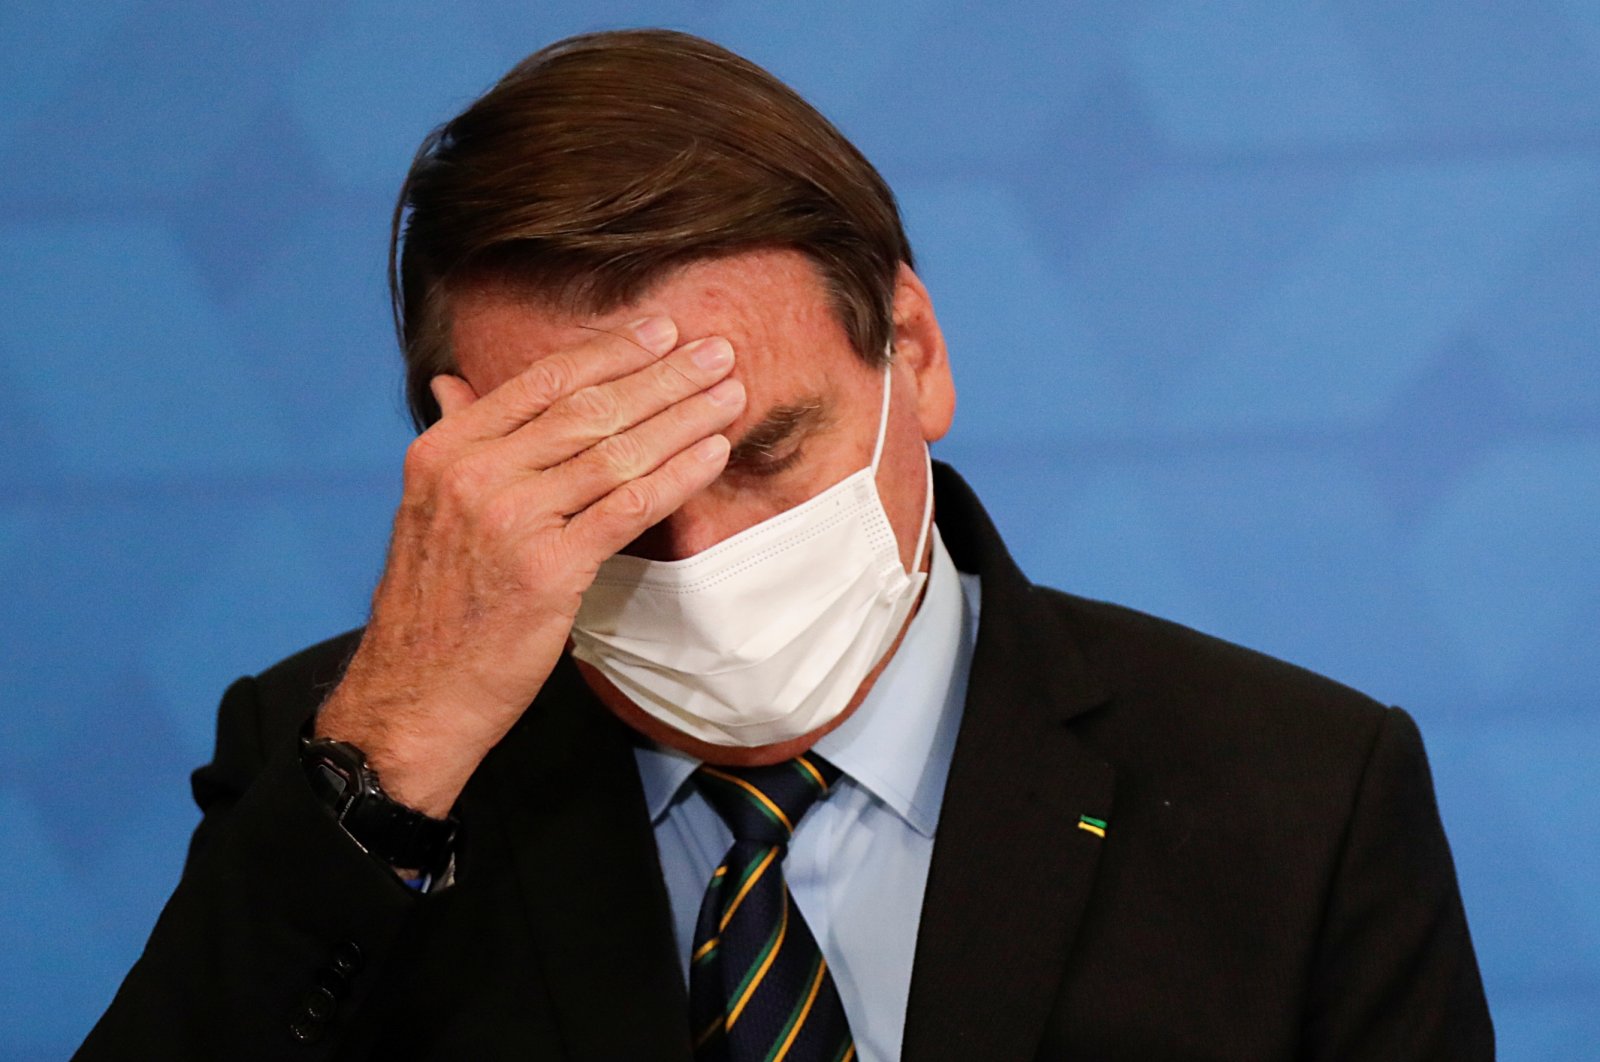 Brazil's President Jair Bolsonaro gestures during a ceremony to announce measures by Caixa Economica bank in support of philanthropic hospitals, in Brasilia, Brazil March 25, 2021. (Reuters Photo)